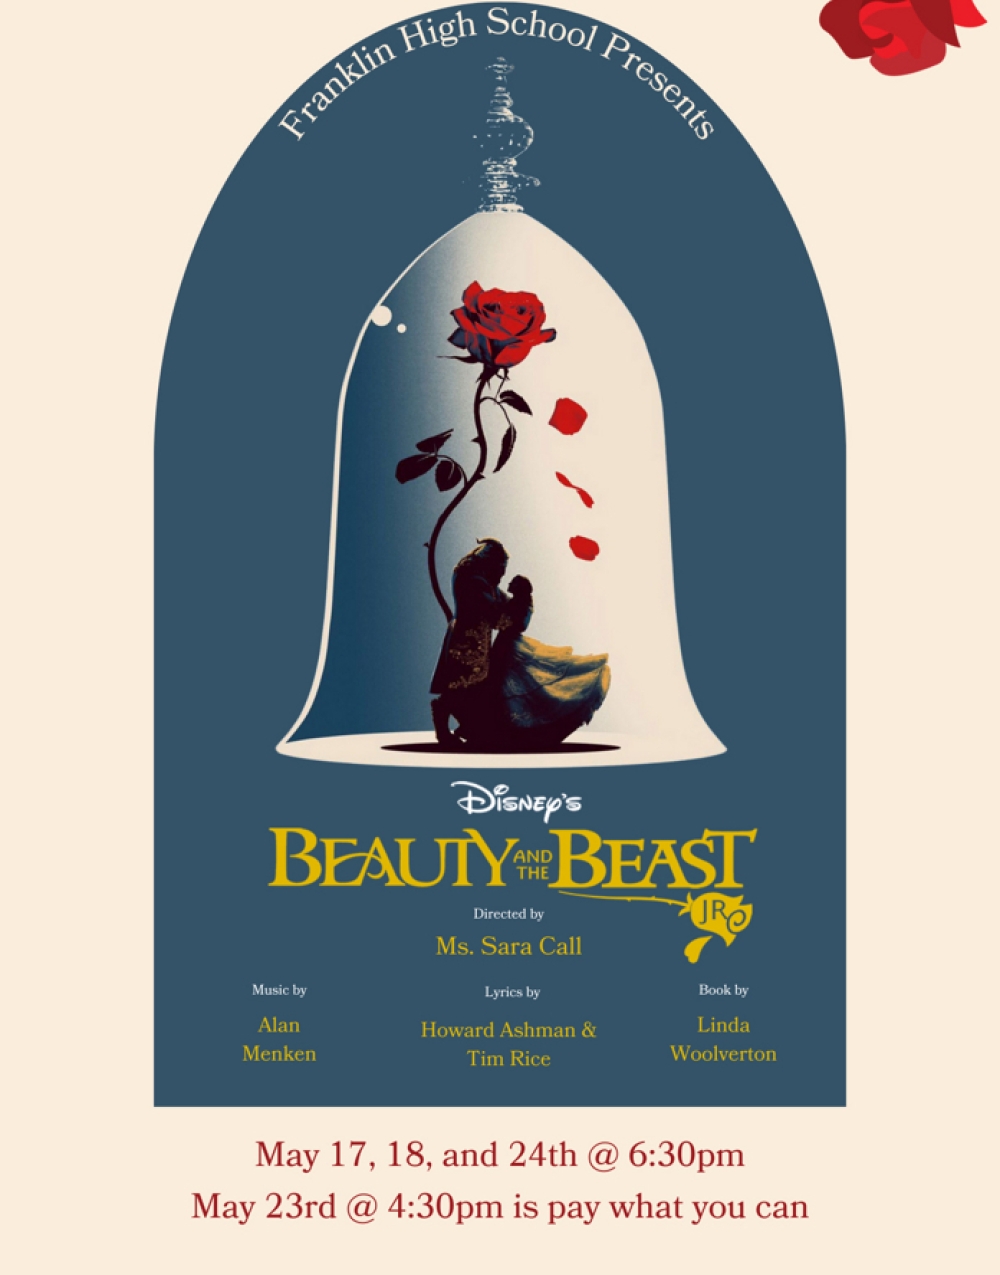 Disney's Beauty And The Beast JR. at Franklin High School Performing Arts